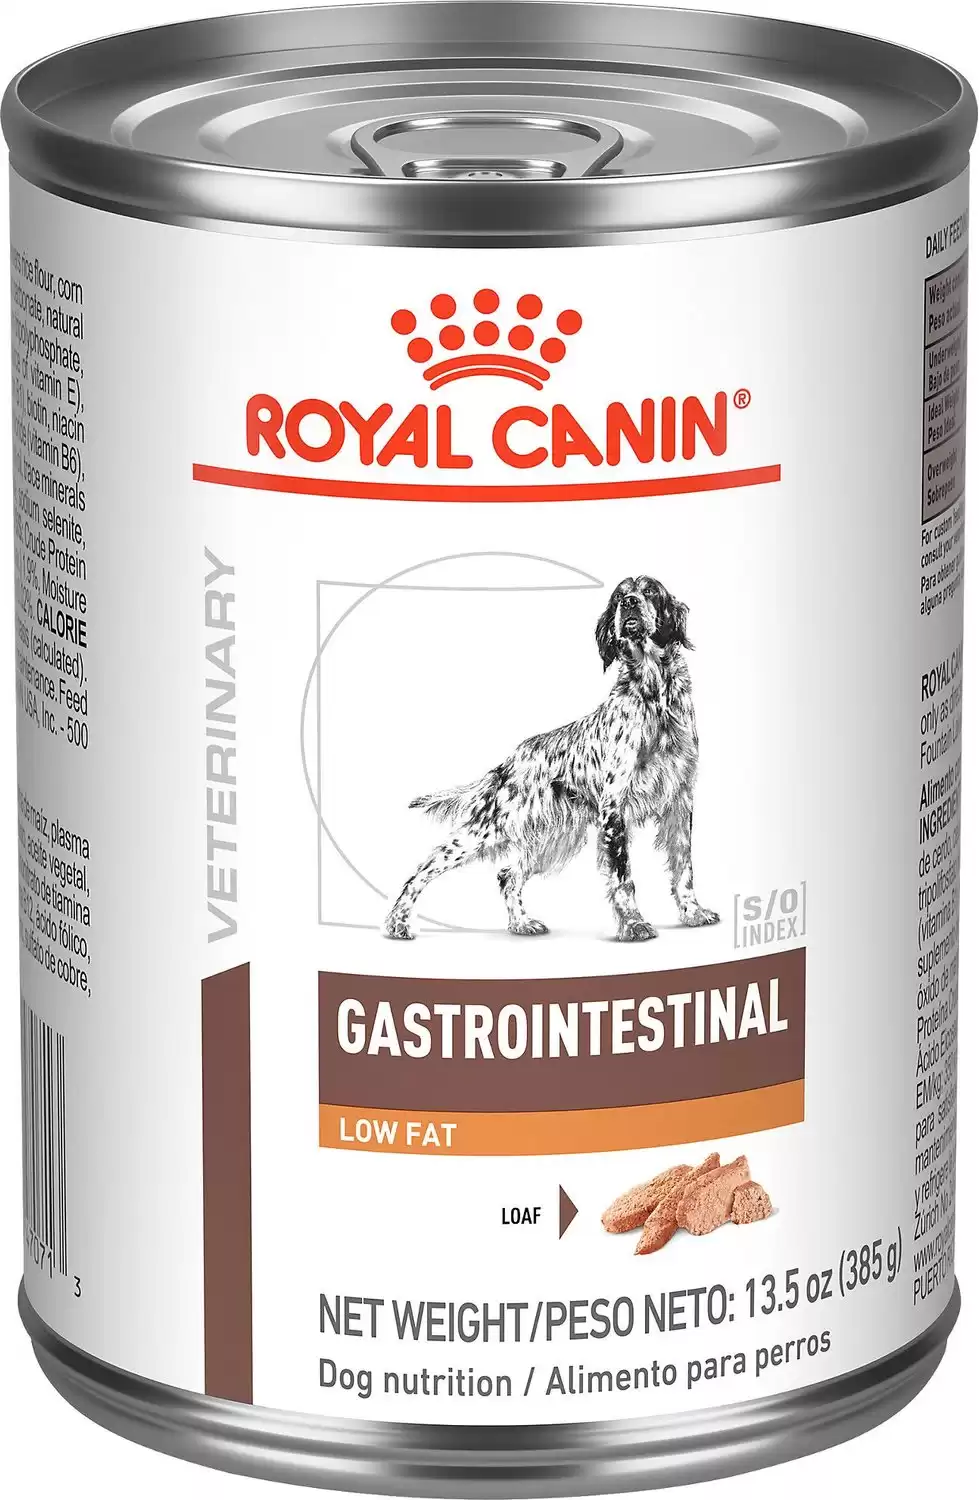 Royal Canin Gastrointestinal Low Fat Loaf